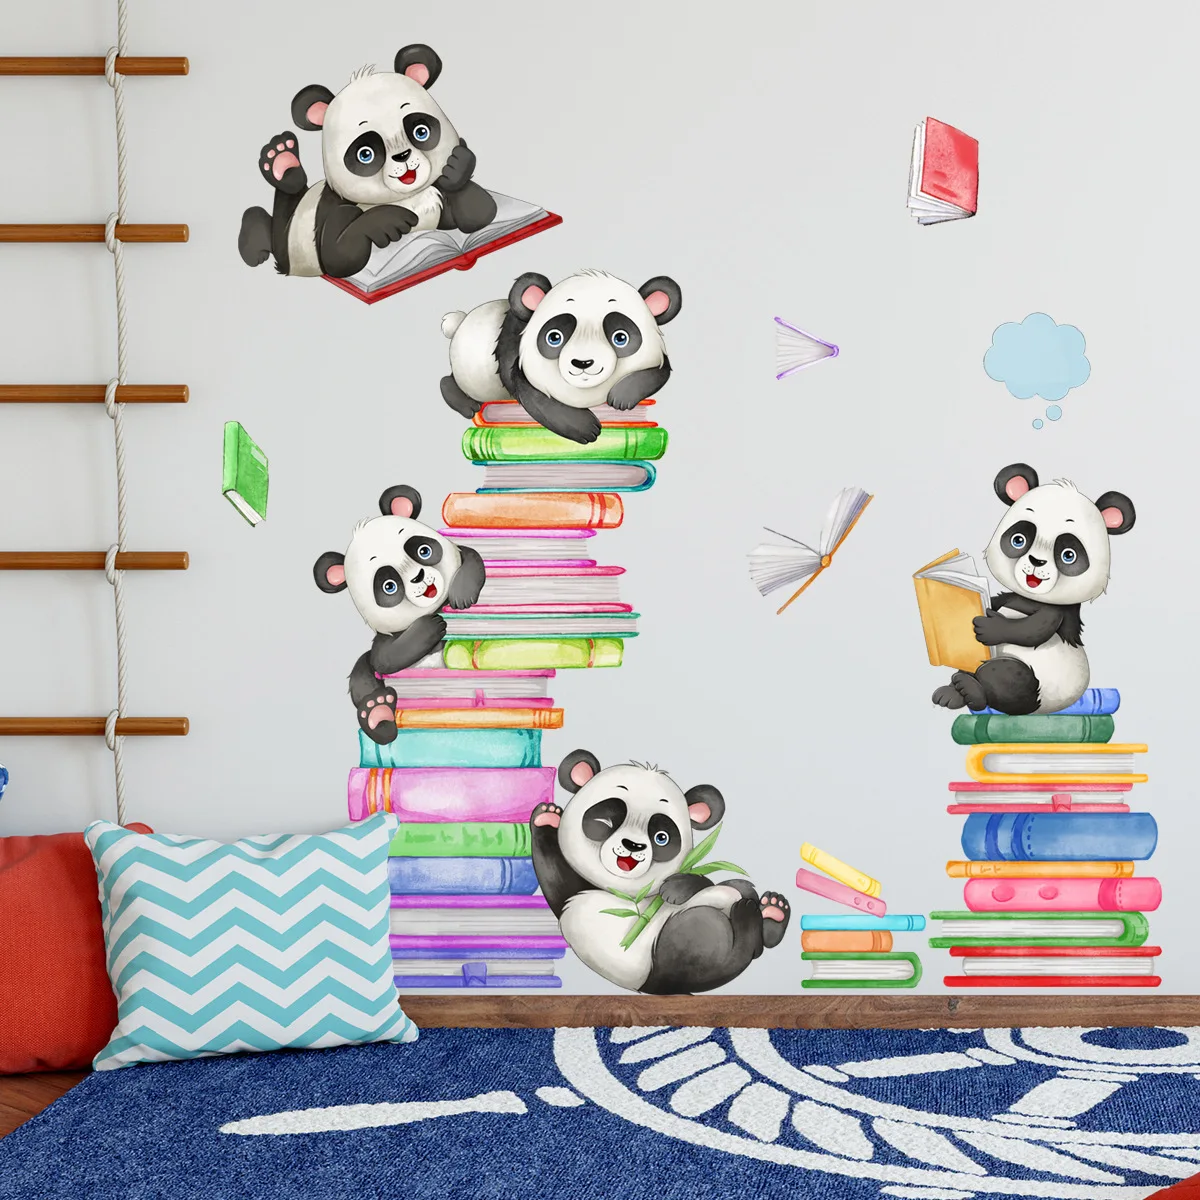 2pcs Animal Panda Book Cartoon Wall Stickers Dormitory Background Wall Home Decoration Wall Stickers Mural Wallpaper Ms6263 10 pcs sponge brush with wooden handle decoration for home holder wallpaper bedroom